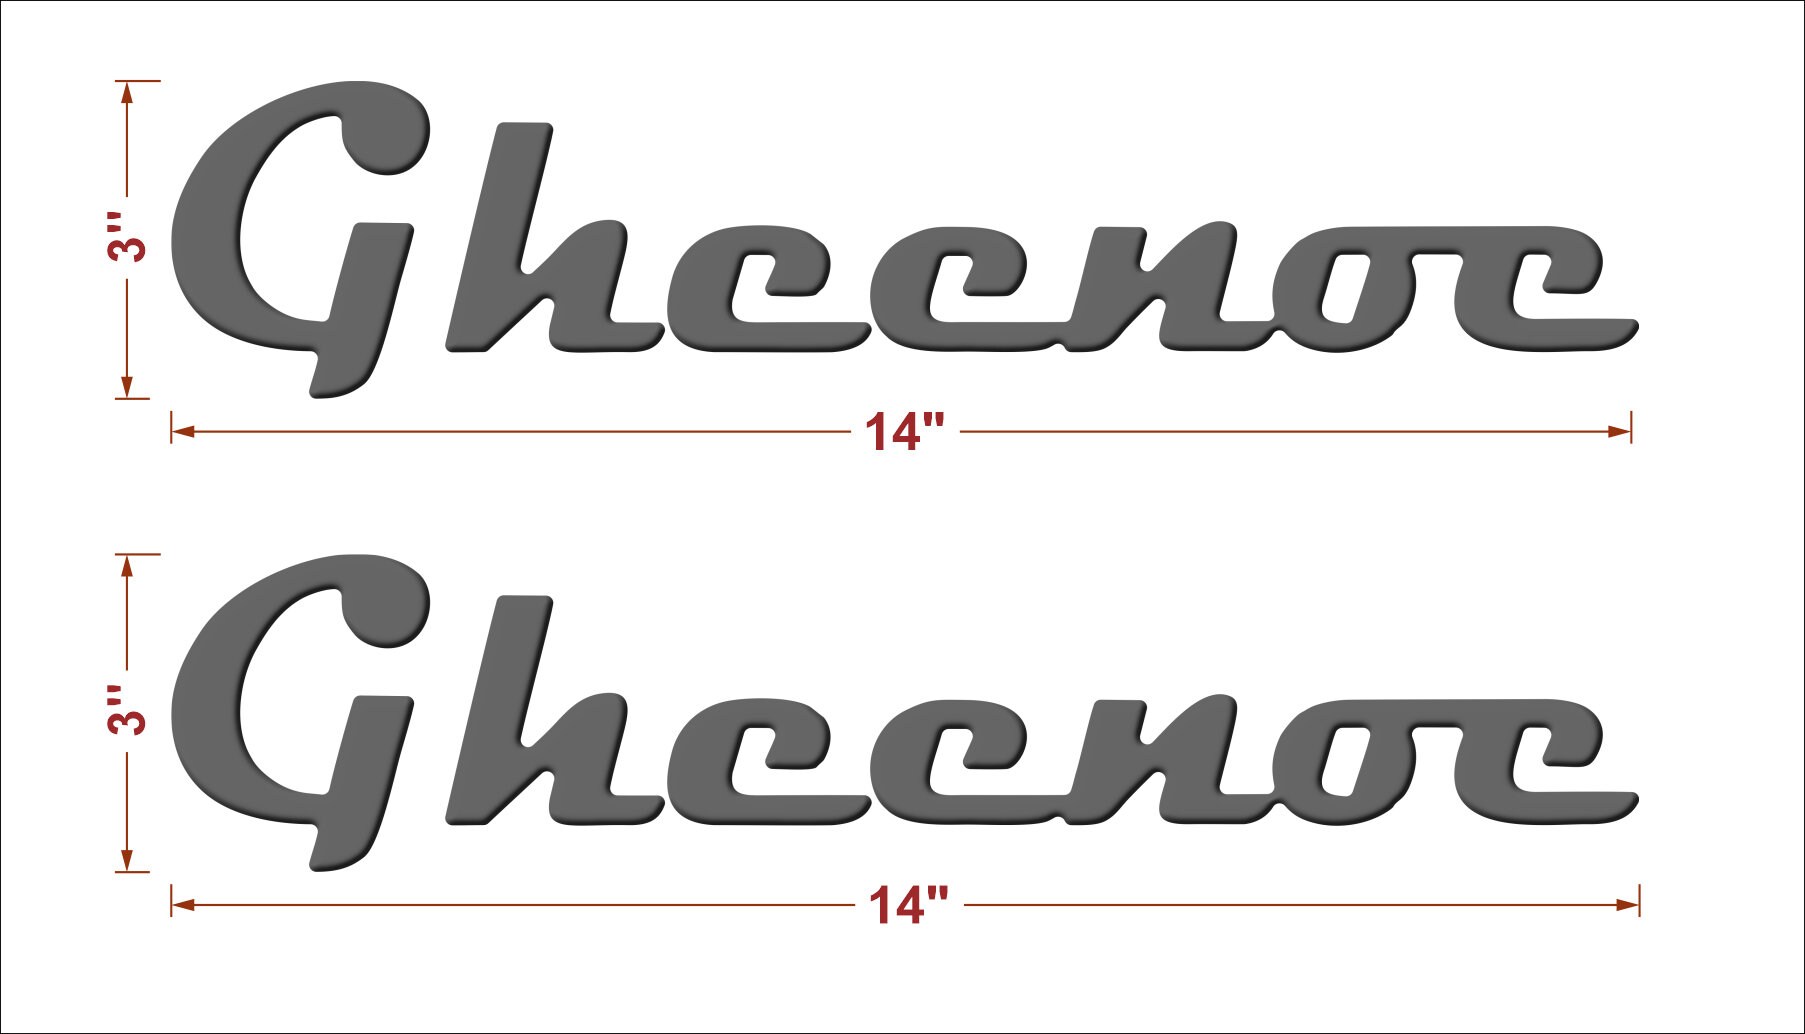 Gheenoe Boat Emblems Domed Boat Decals Stickers set 